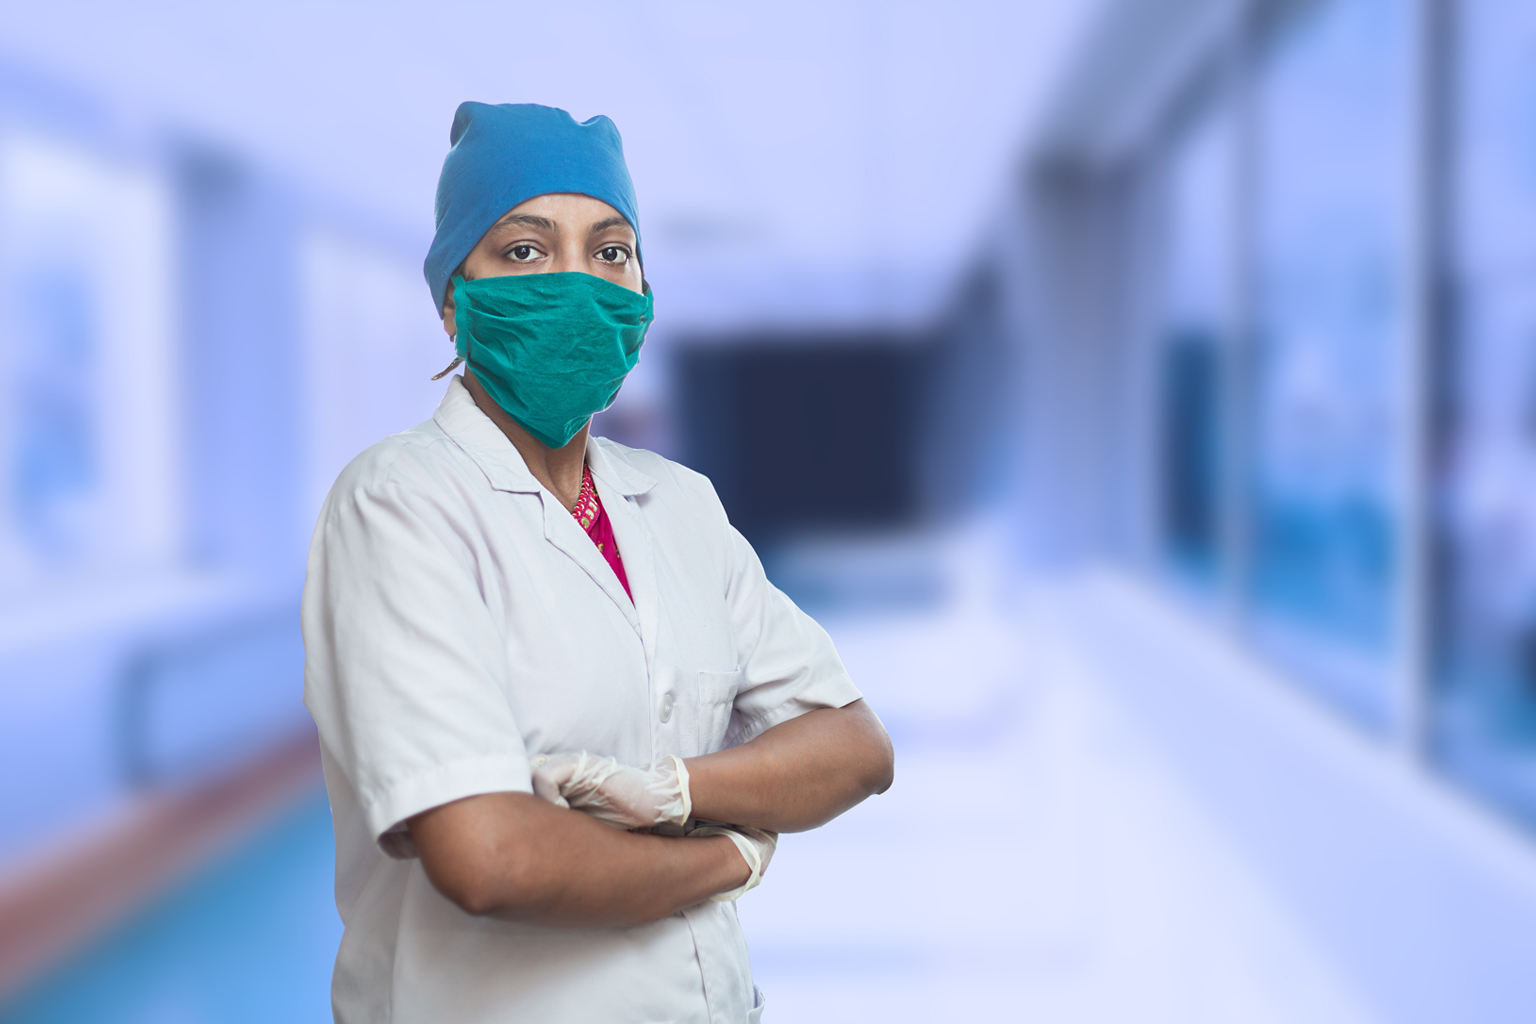 Portrait of female medical worker doctor wearing surgical mask and cap standing crossed arms outside hospital corridor covid-19 coronavirus pandemic